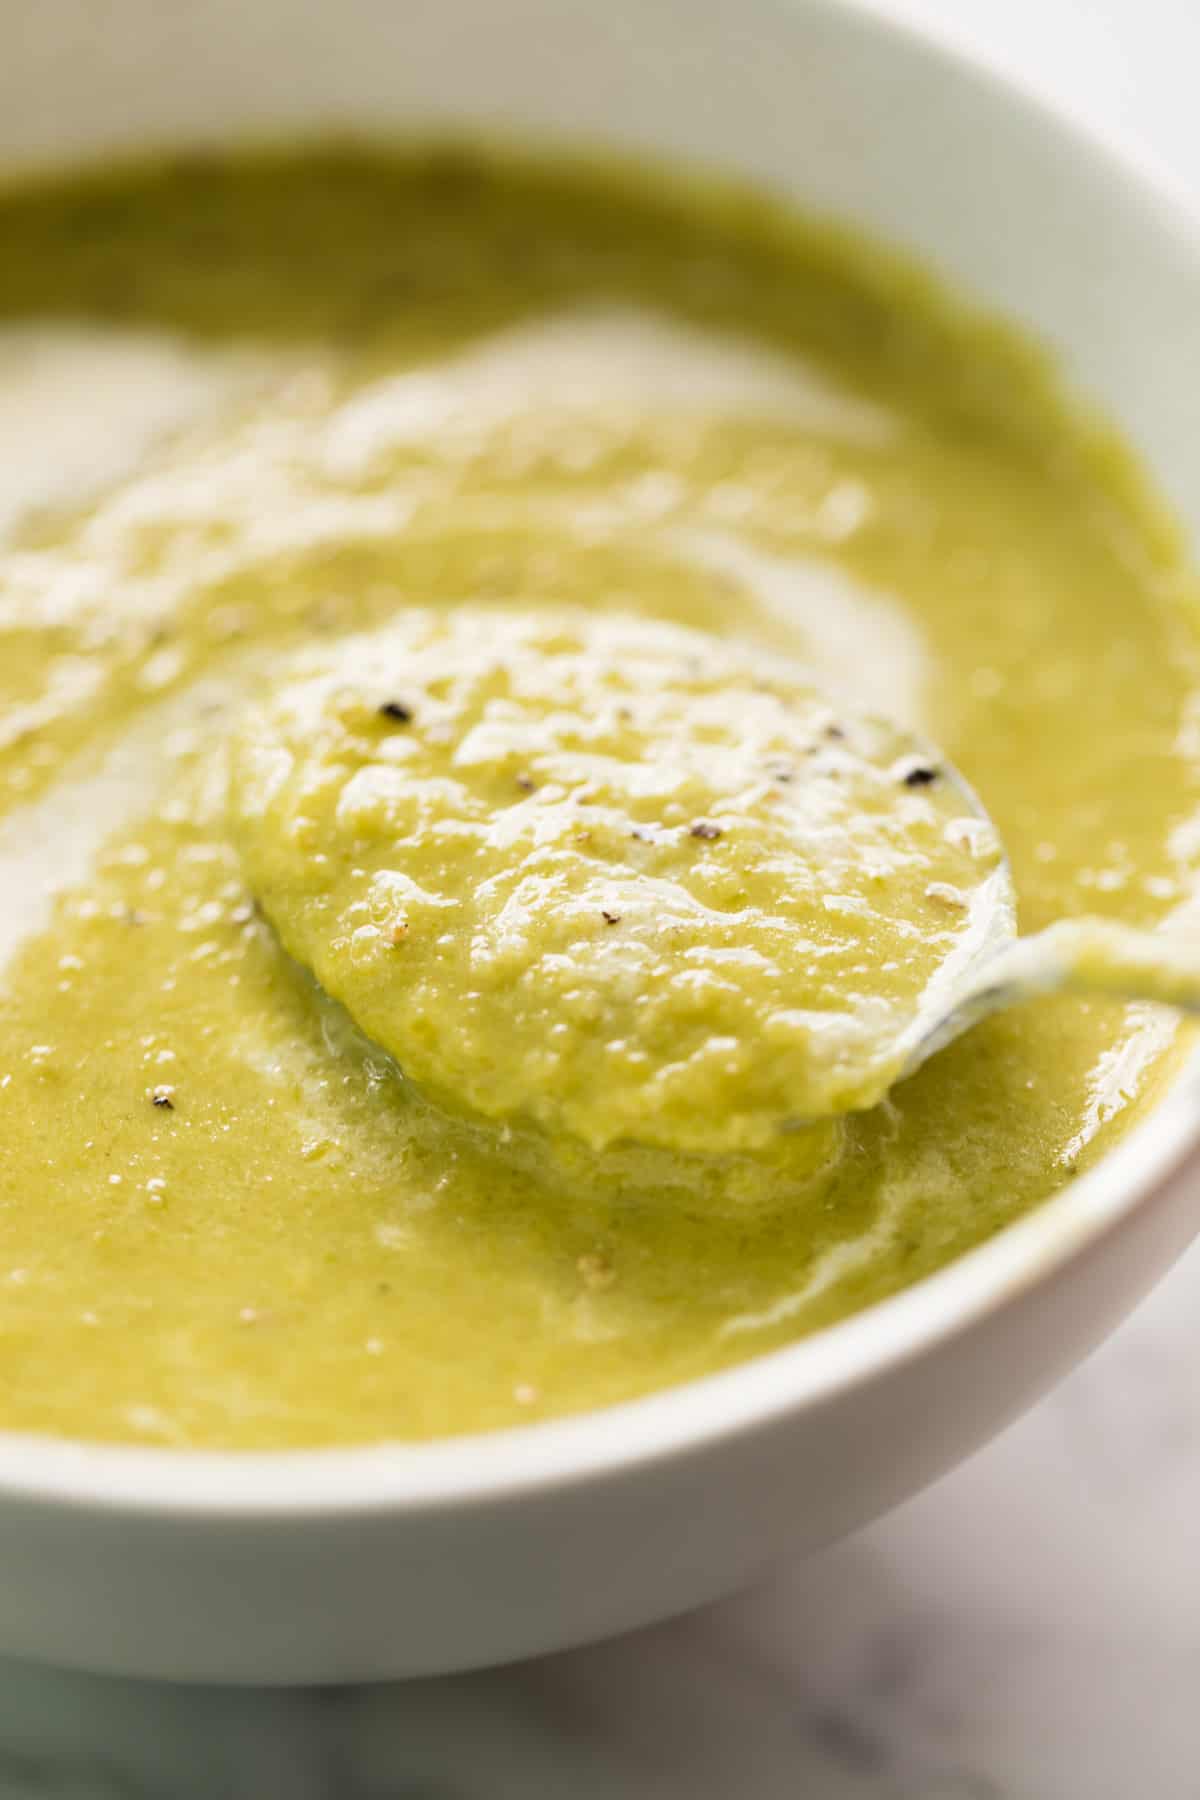 A comforting white bowl of cream of asparagus soup garnished with cracked black pepper. Served with a silver metal spoon in the soup ready to eat!